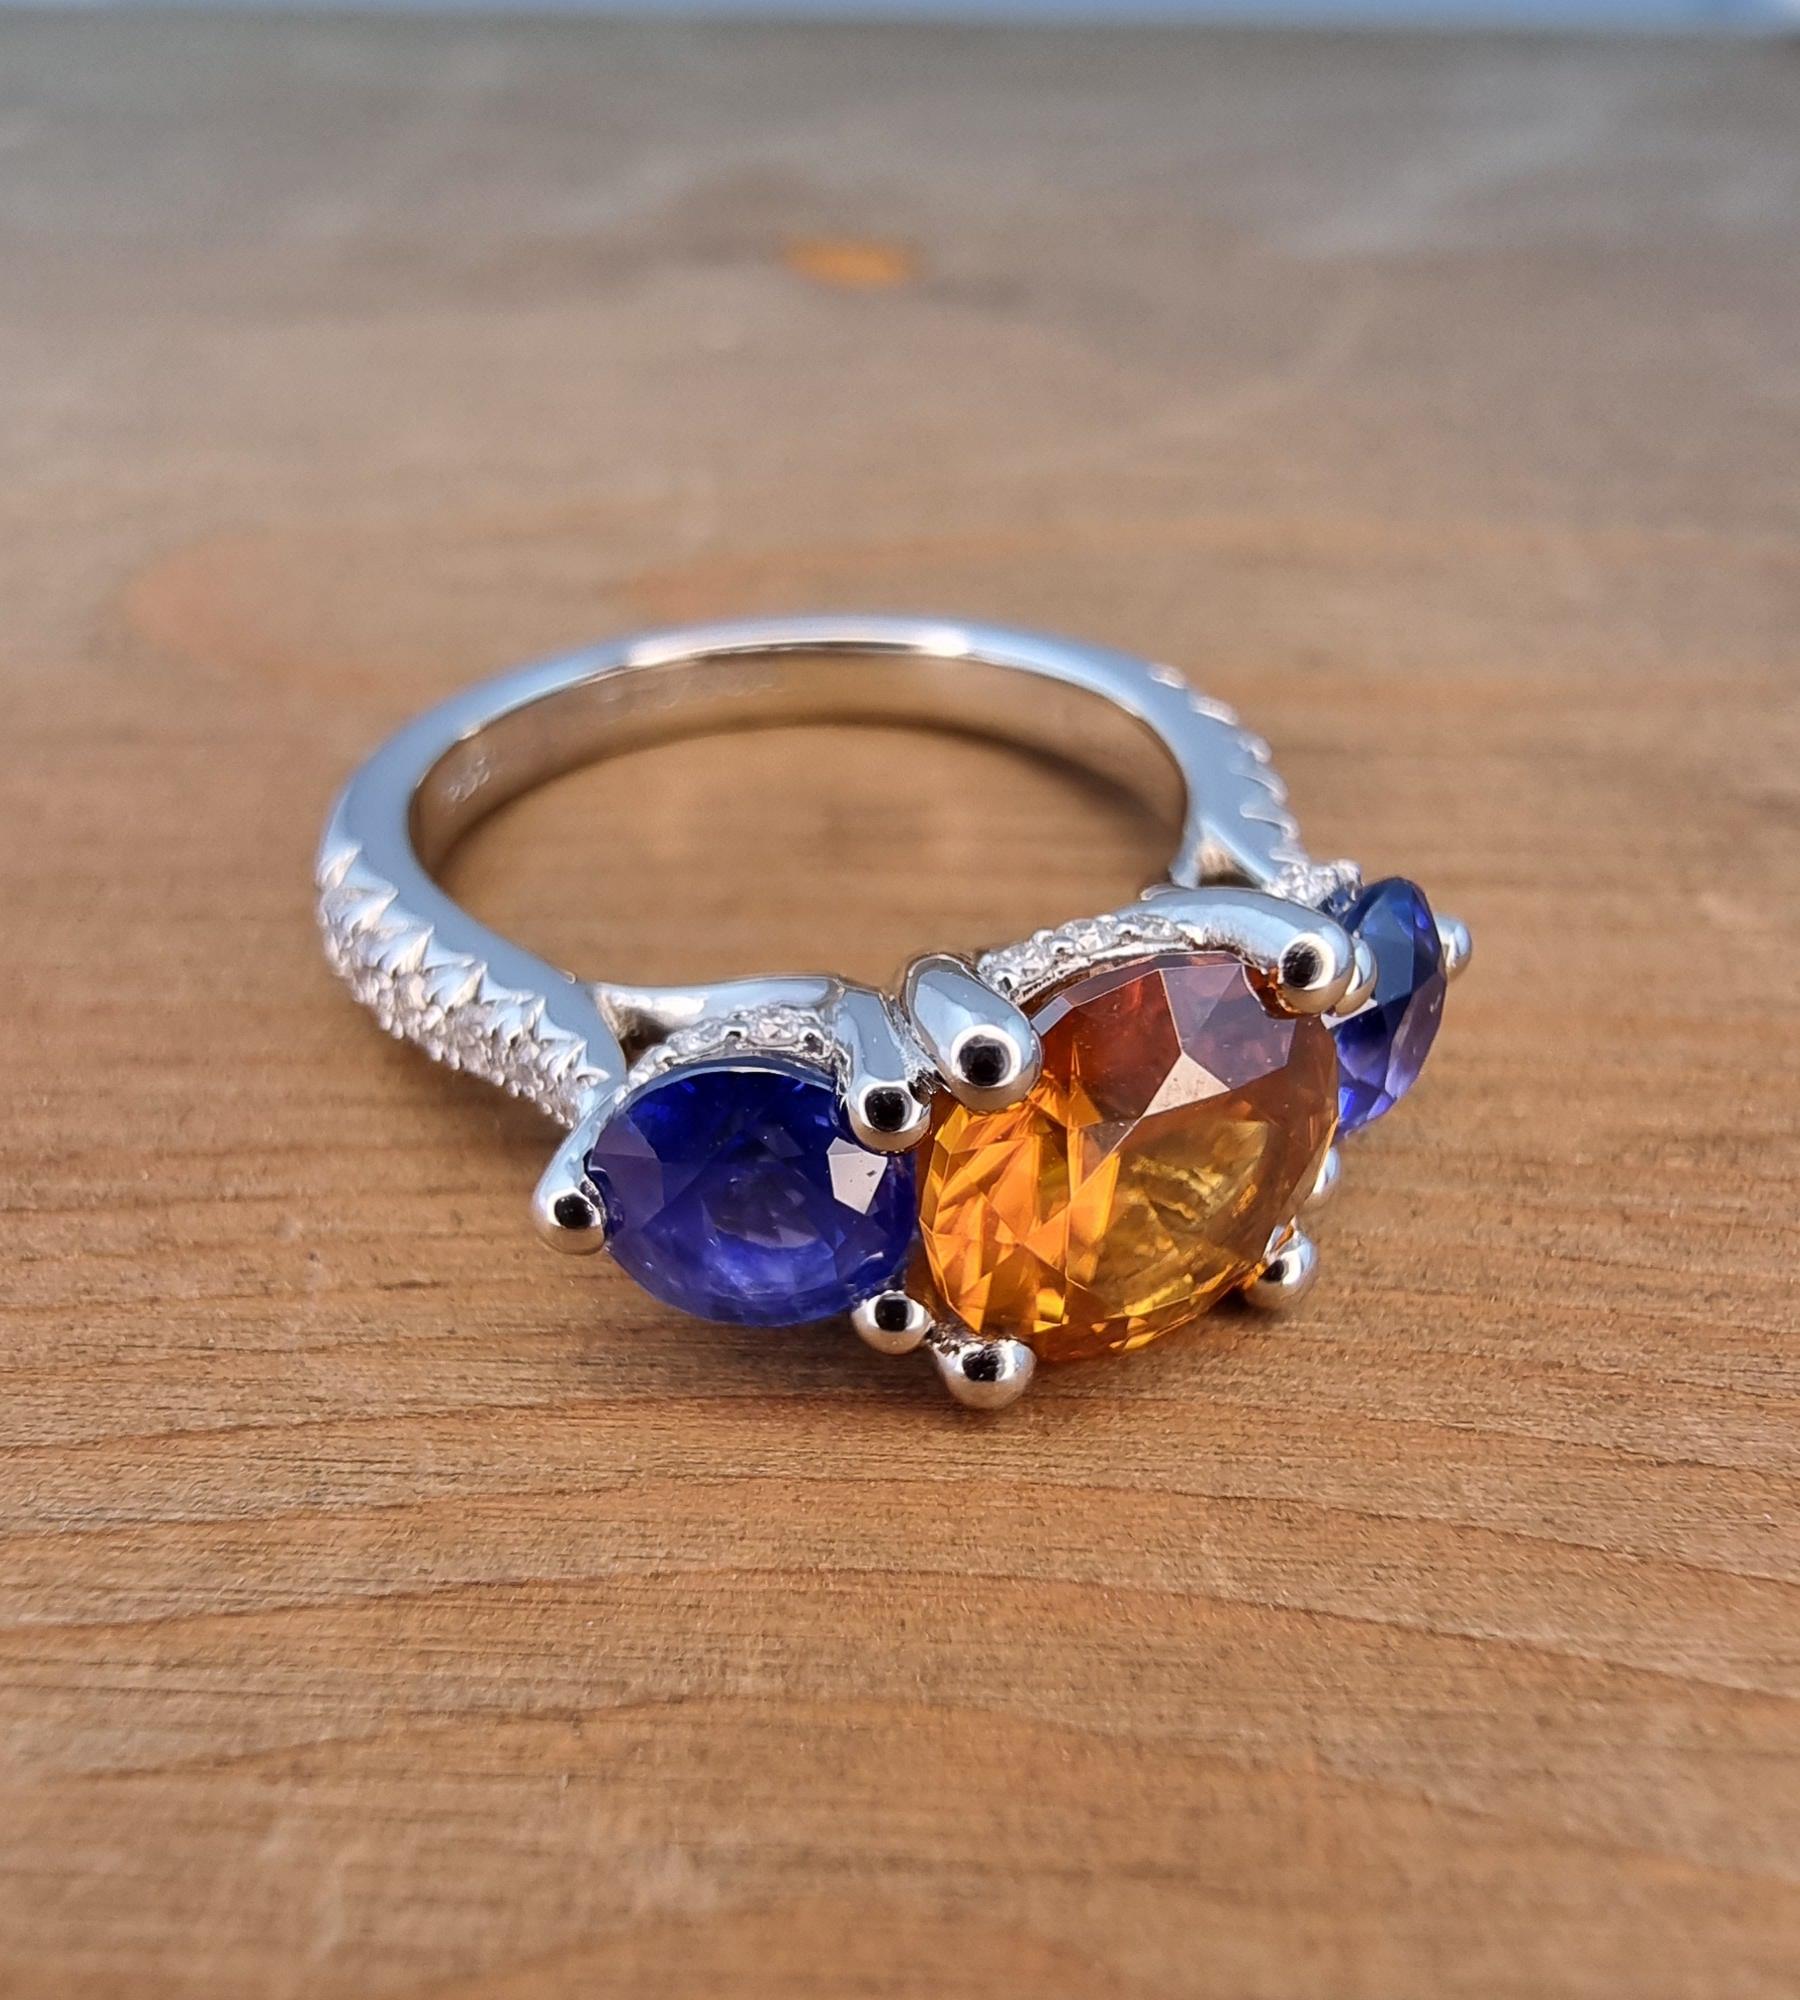 Women's PT950 Ring with Natural White Diamonds, Natural Orange Zircon and Two Sapphires